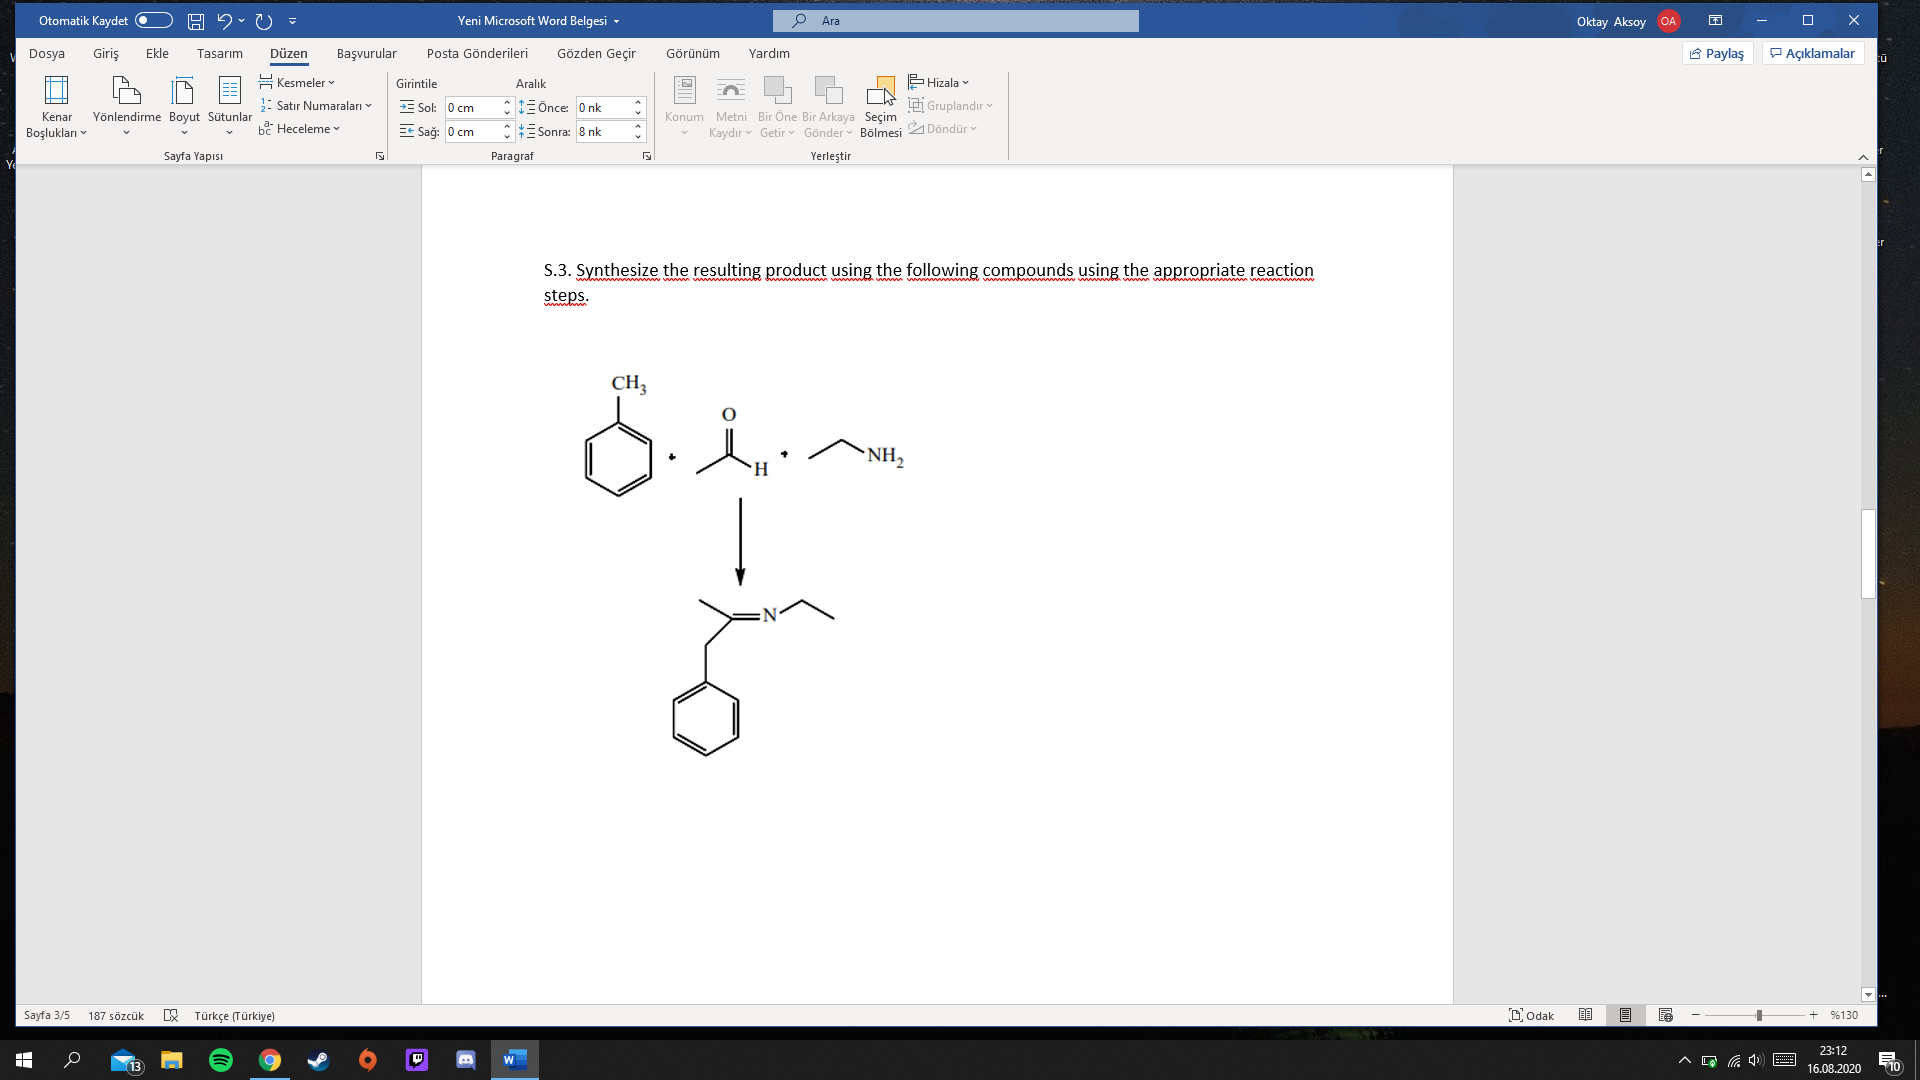 S.3. Synthesize the resulting product using the following compounds using the appropriate reaction
ww w m
www w w
steps.
CH3
*NH,
=N*
